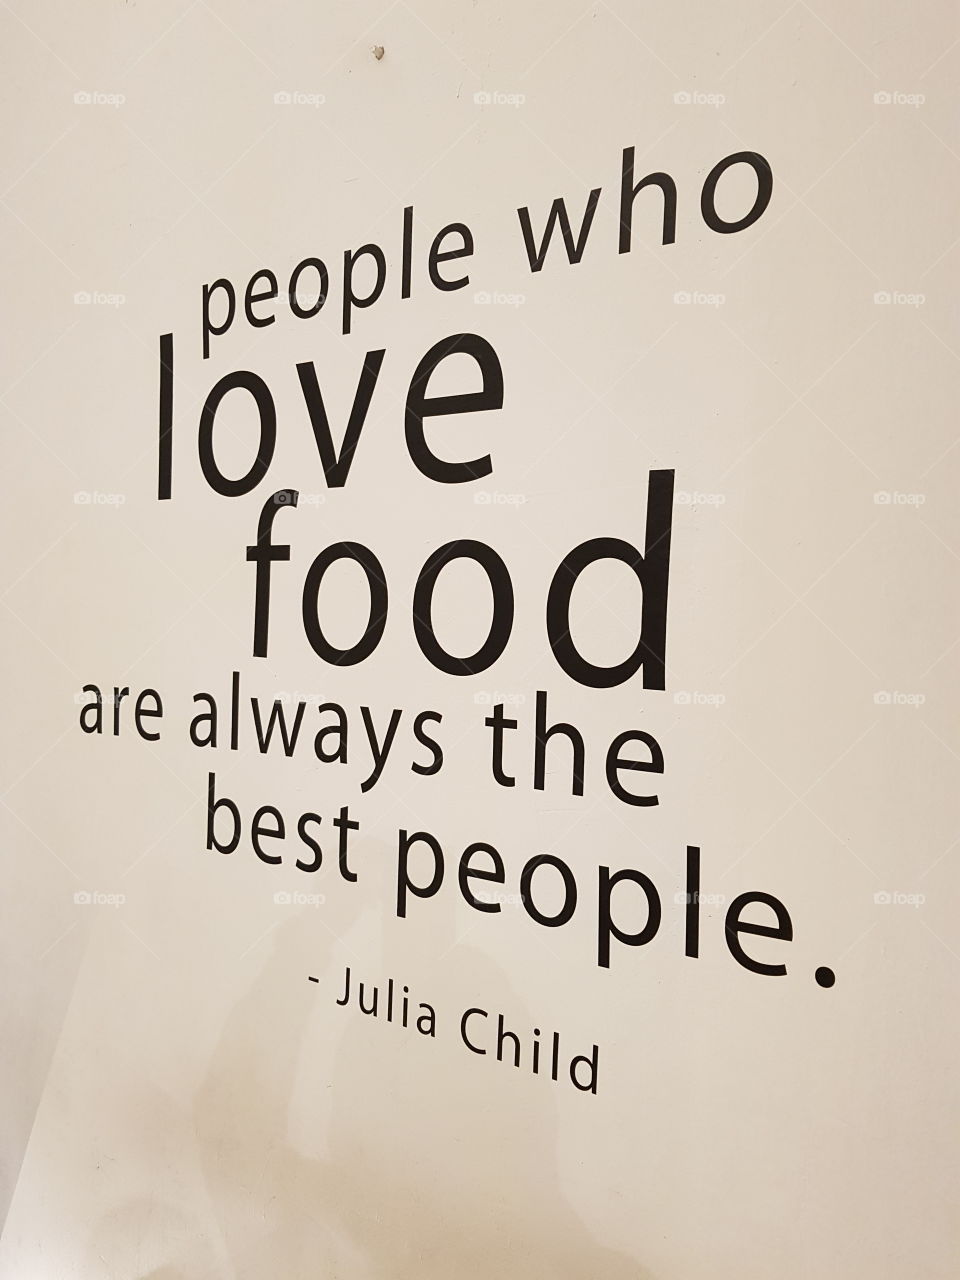 Looking at this word and nothing is wrong. Best people always love their food. Love your word - Julia Child